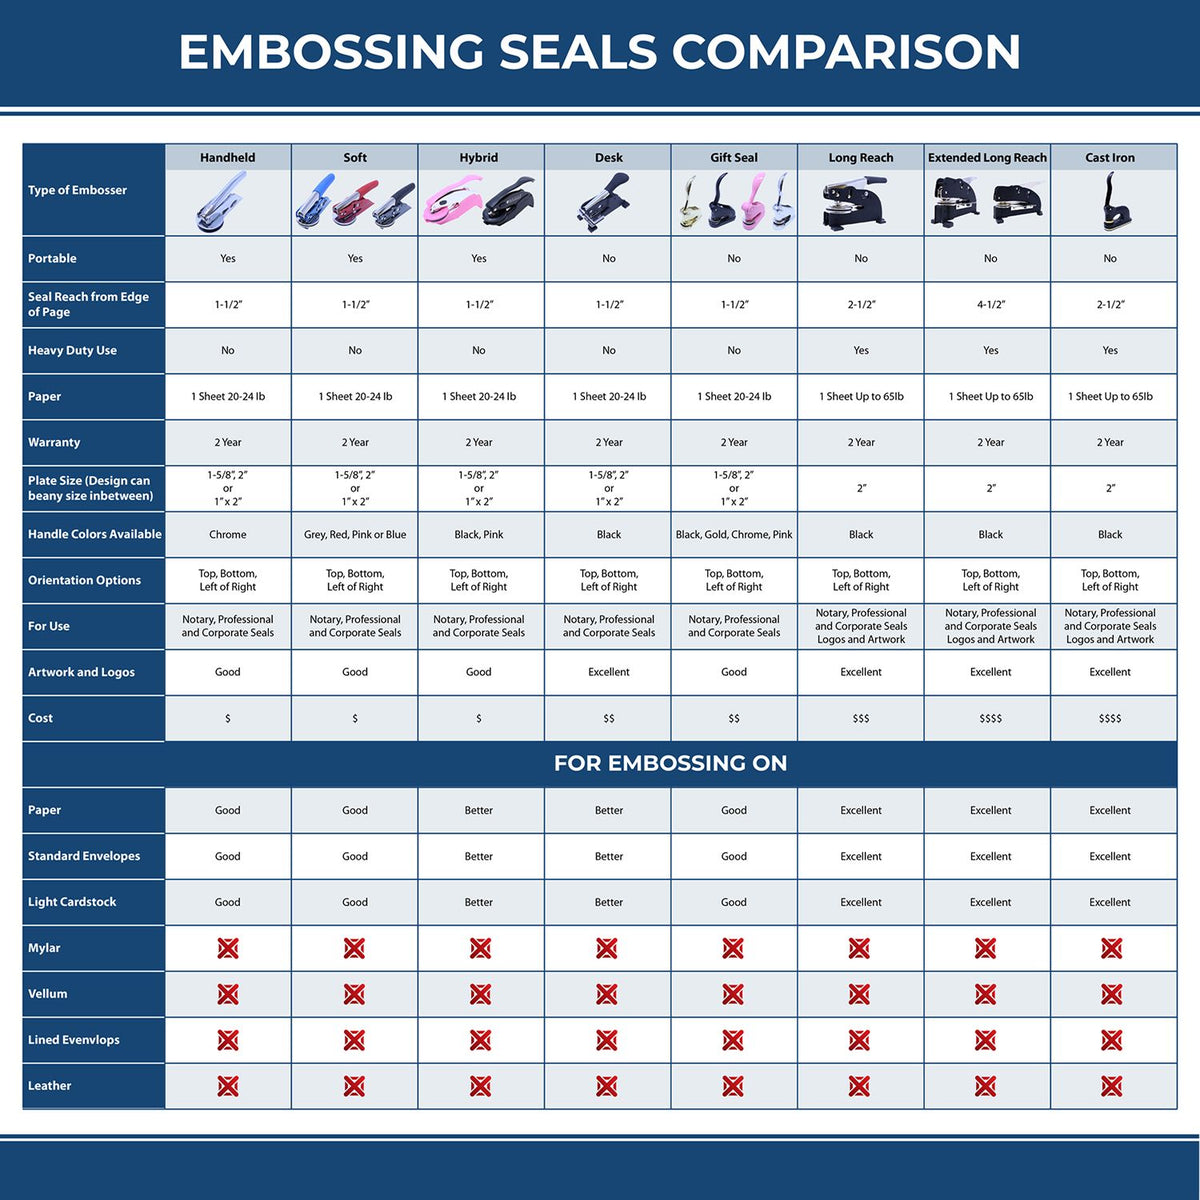 A comparison chart for the different types of mount models available for the Hybrid Nevada Engineer Seal